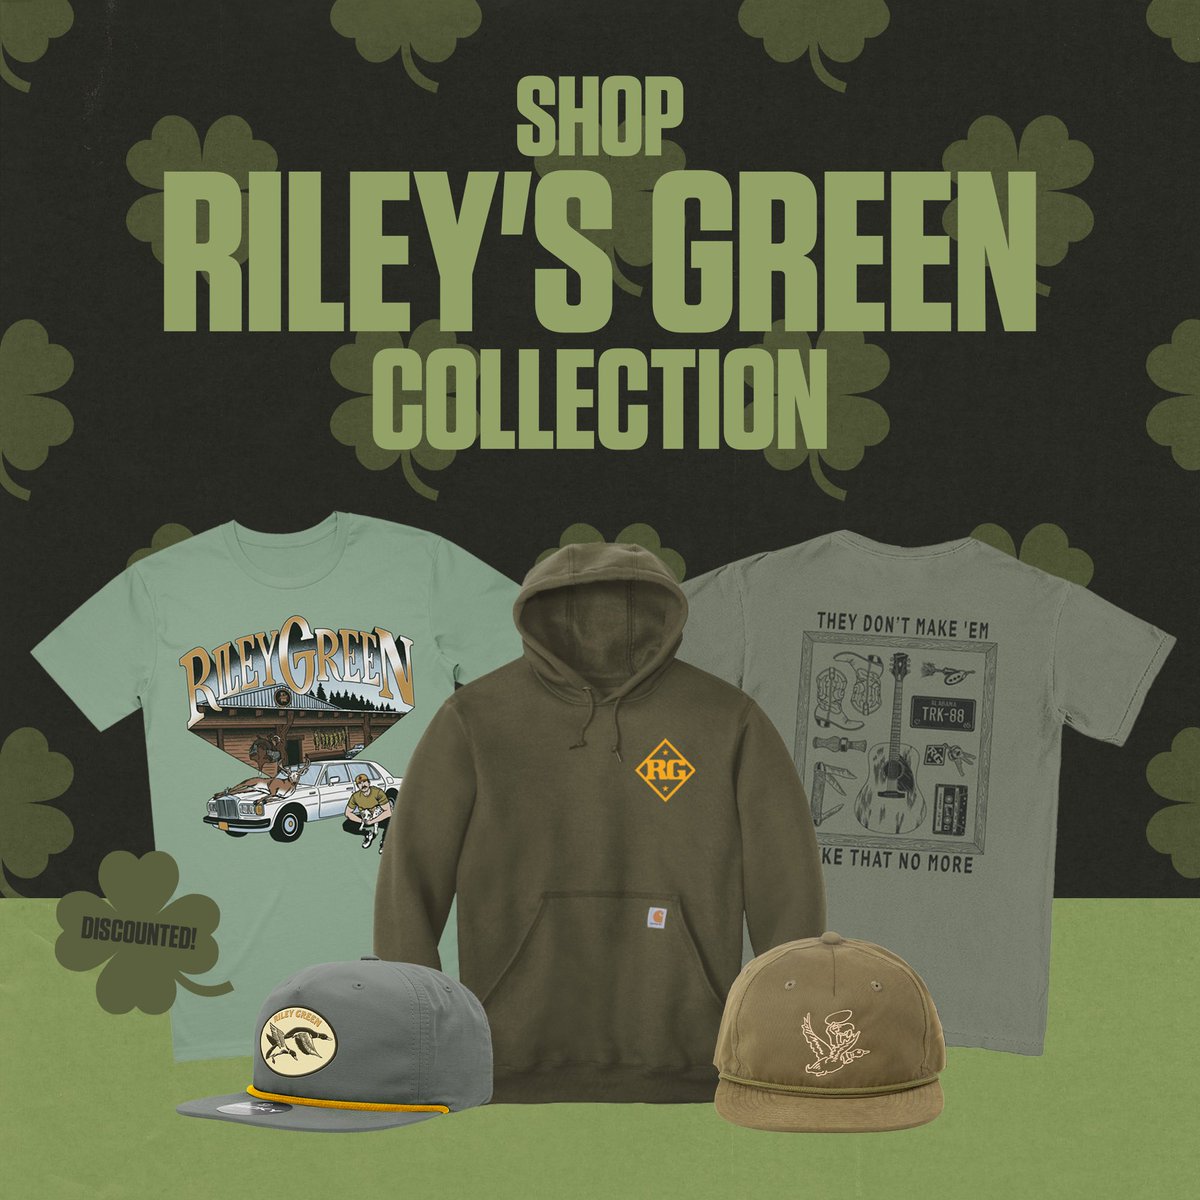 Y’all check out the GREEN collection in honor of St. Patty’s Day weekend: rileygreen.merchmadeeasy.com/collections/ri…